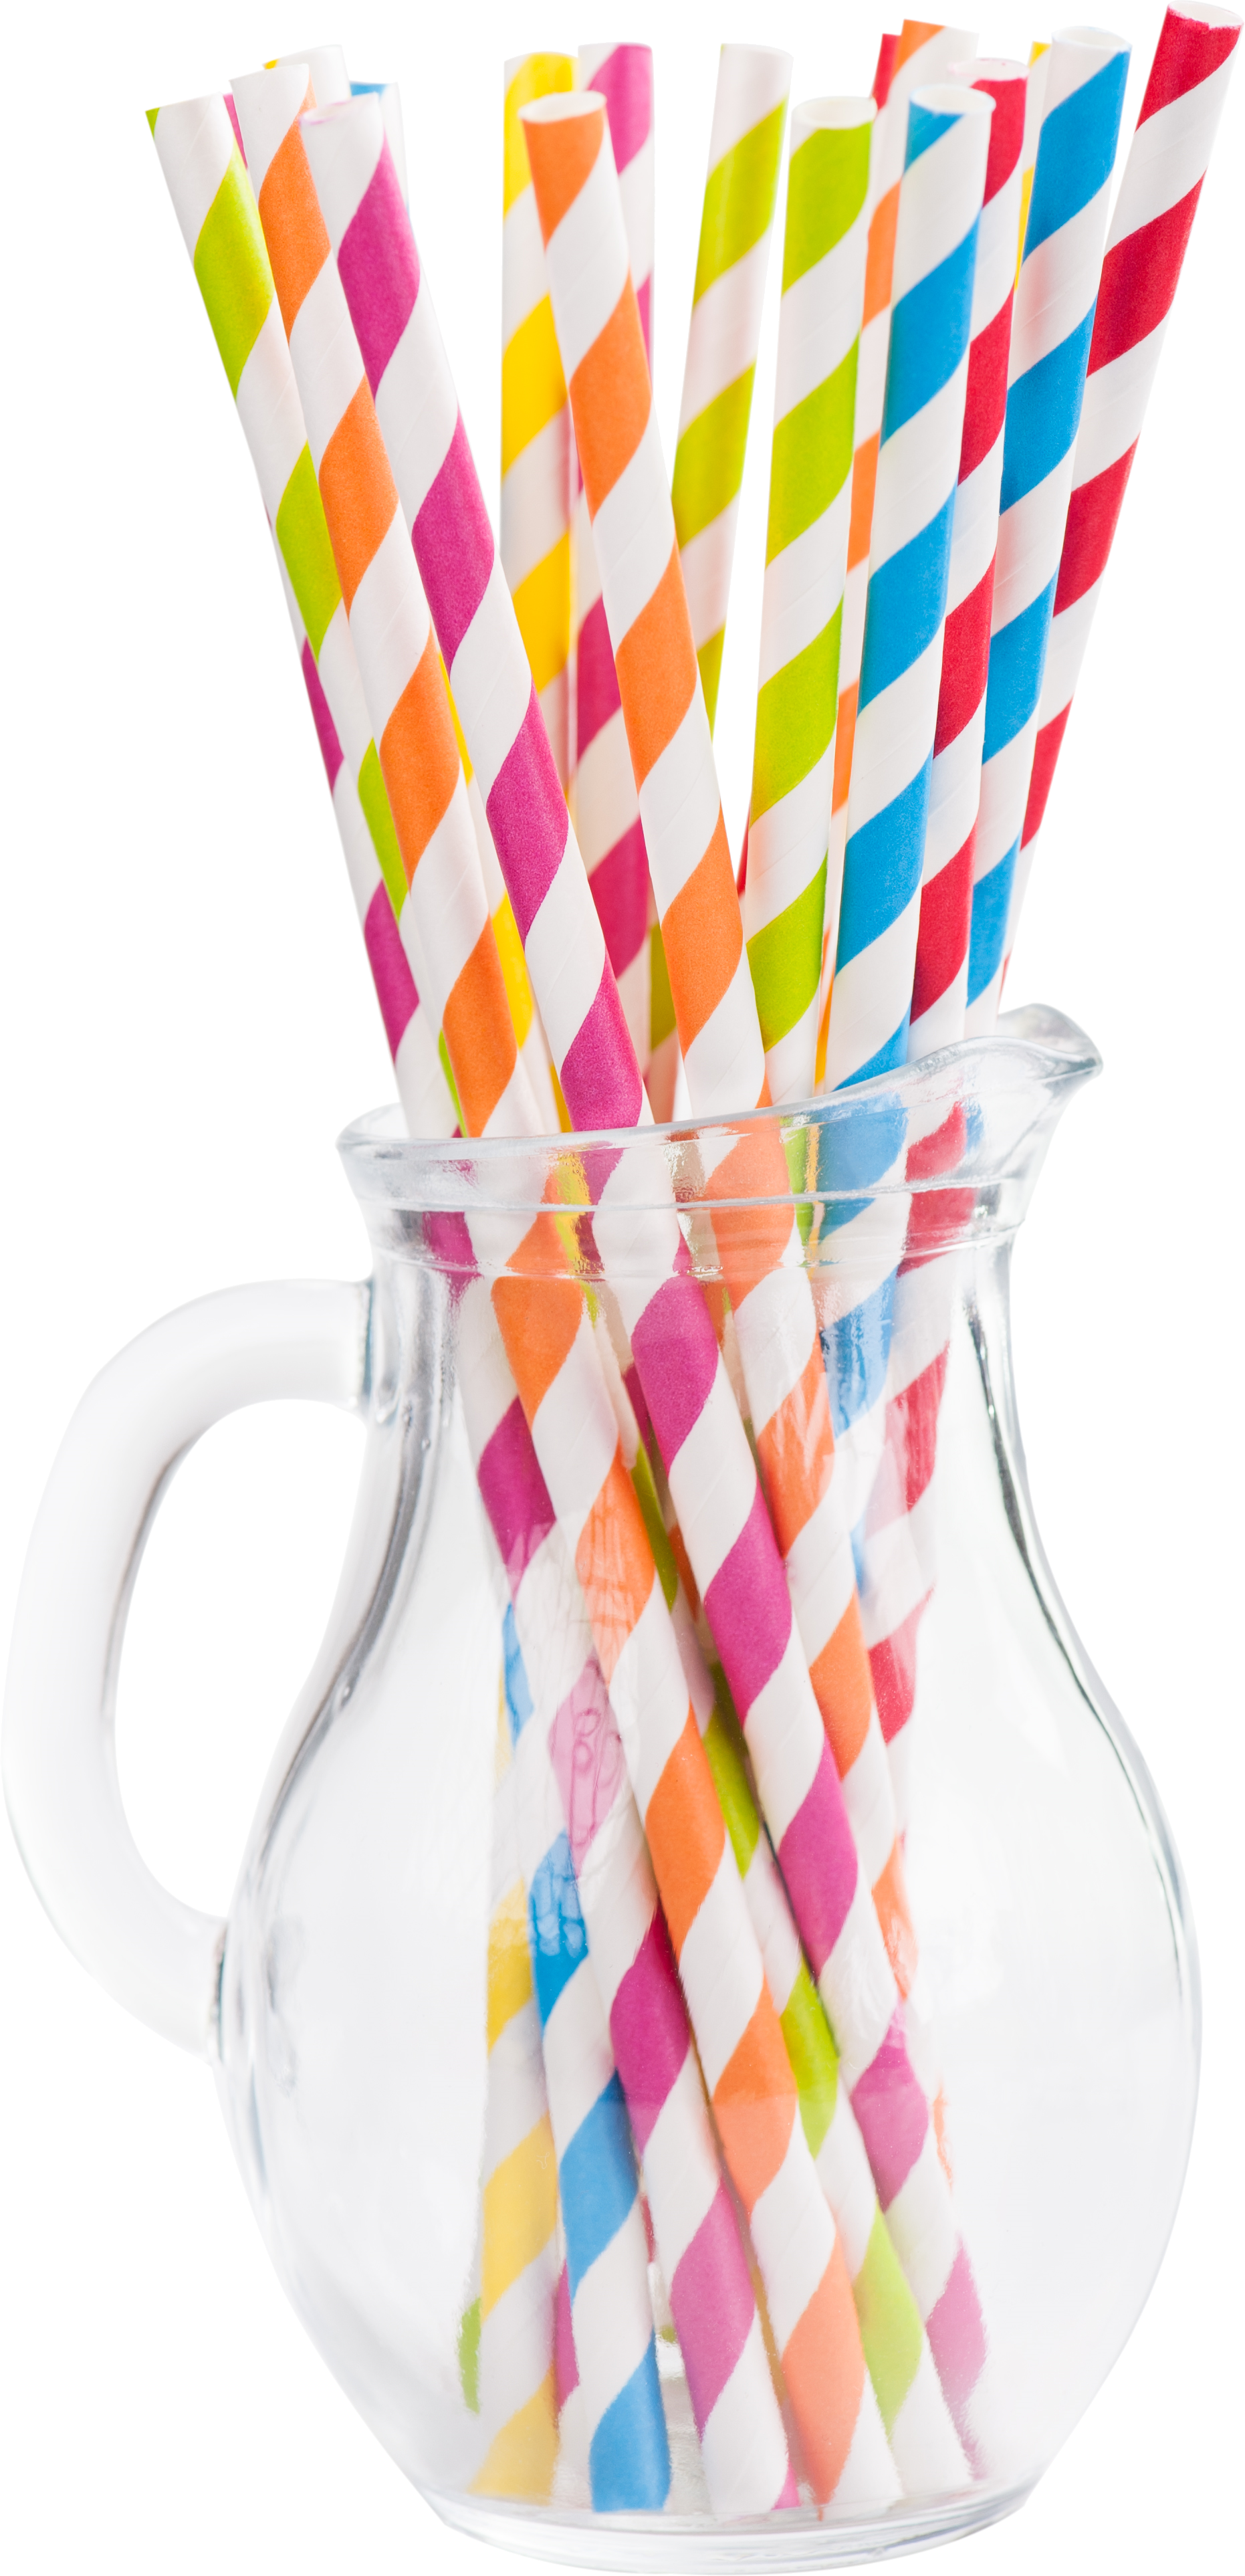 Paper Straws, Eco-Friendly & Sustainable Paper Packaging Solutions for Food Service Industry [ABPP Papers]